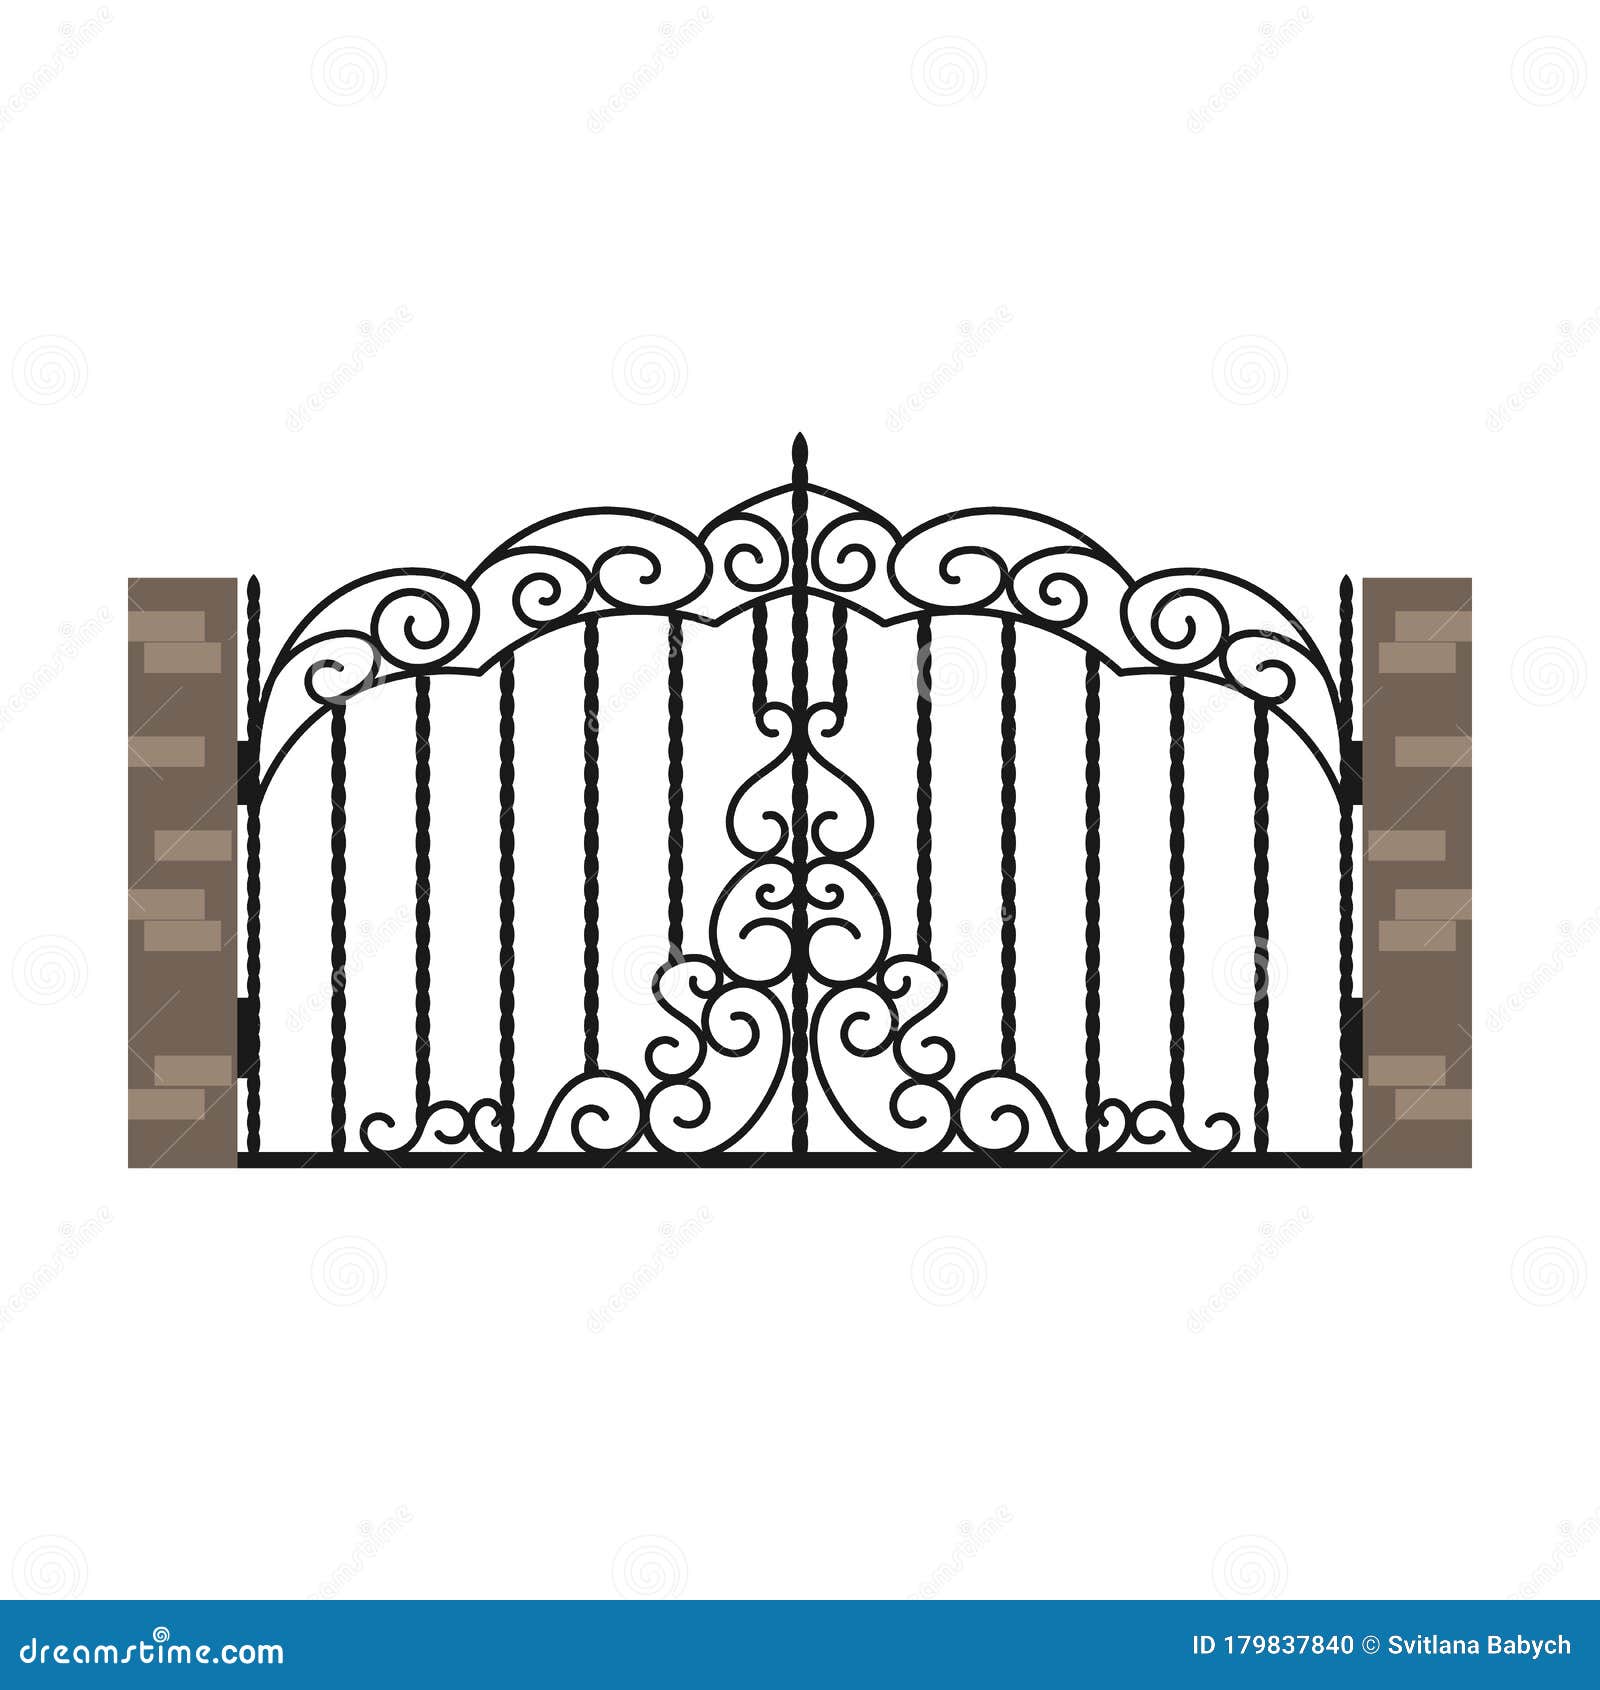 Fence Gate Vector  Vector Icon Isolated on White Background  Fence Gate. Stock Vector - Illustration of elegance, decorative: 179837840